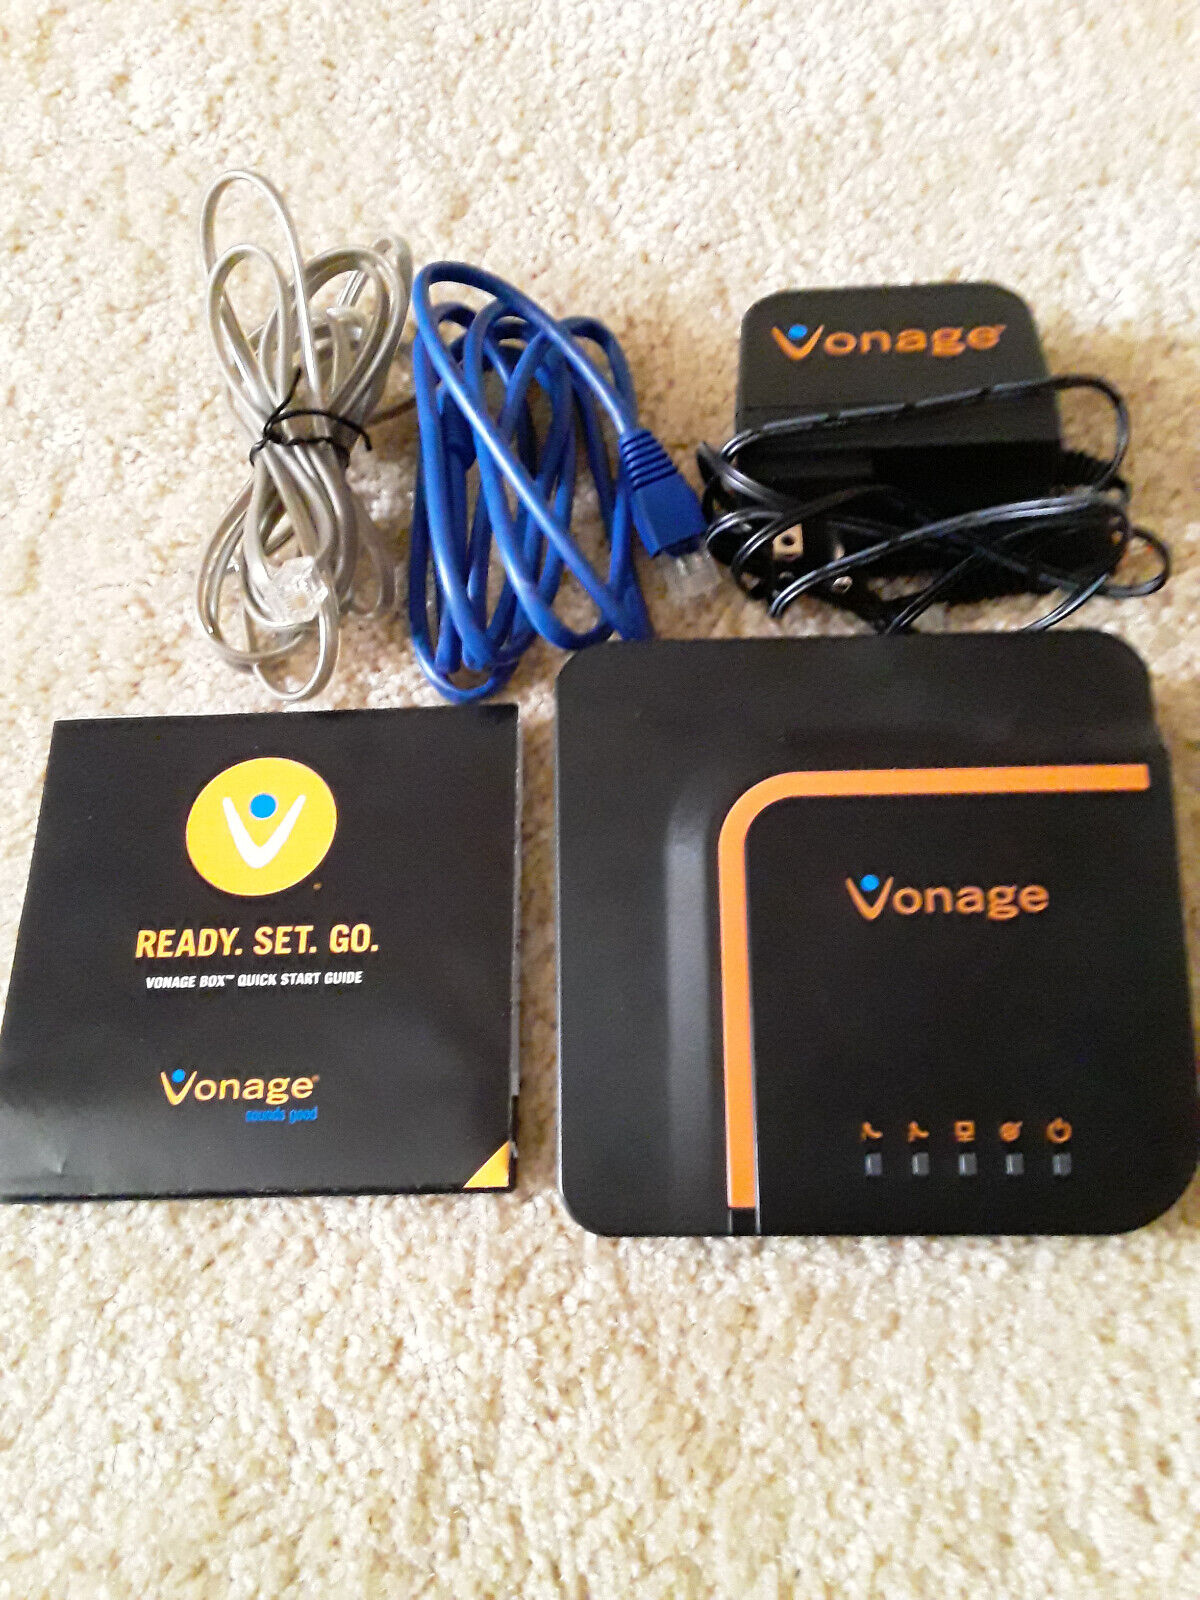 Vonage VDV23-VD Digital Phone Router Modem VOIP with Power Adapter & All Cables